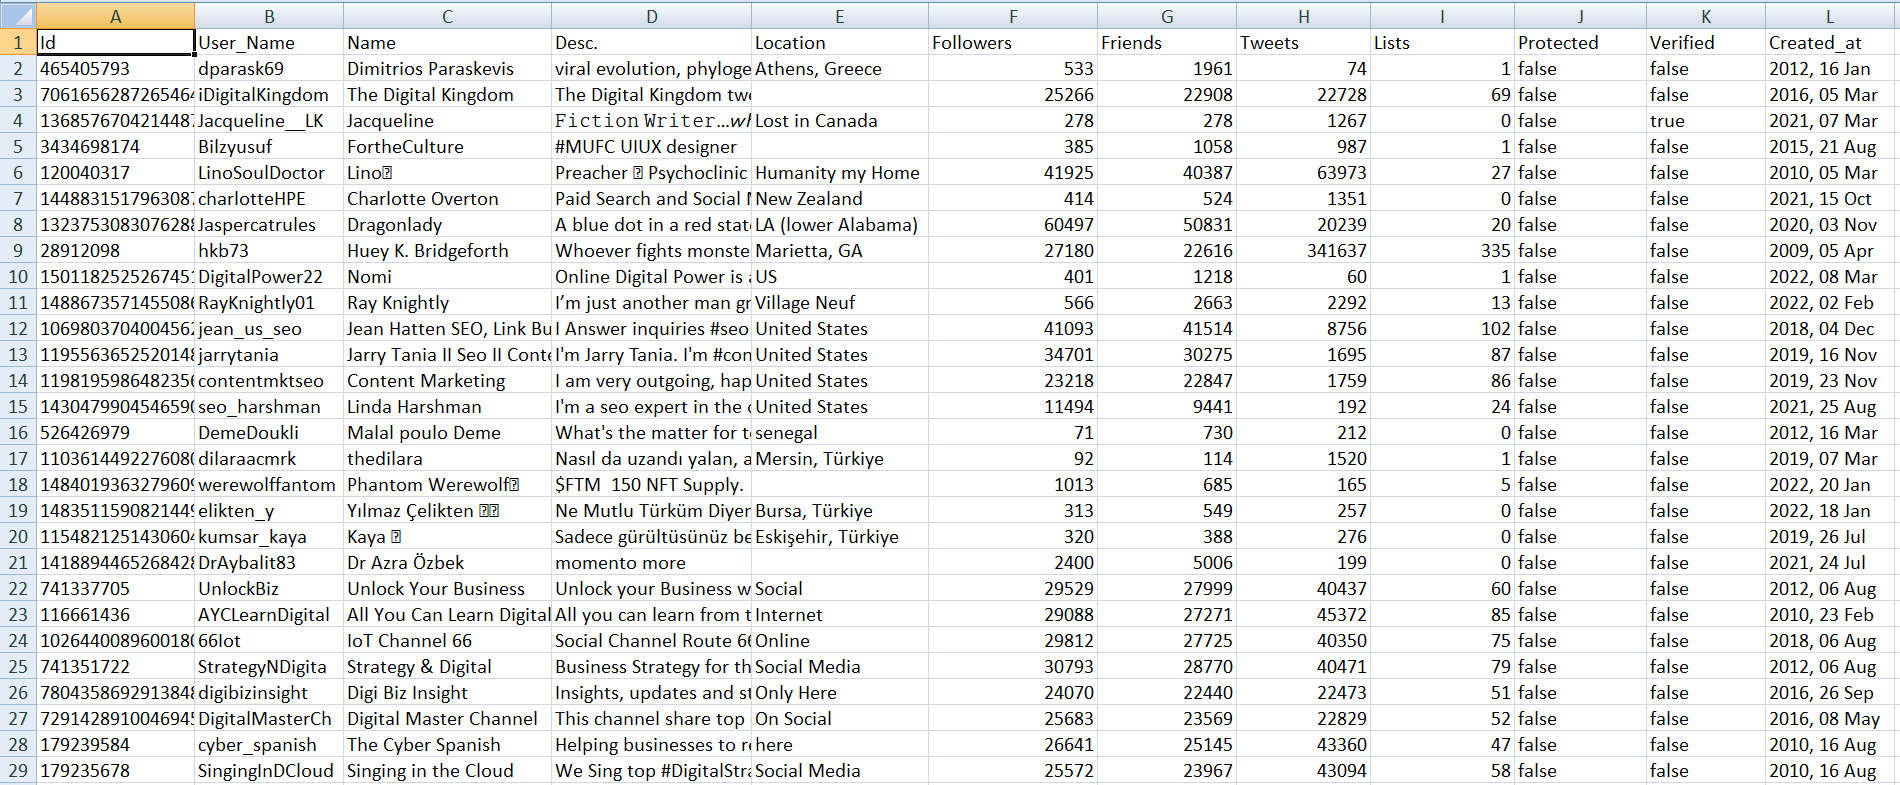 Twitter exported data